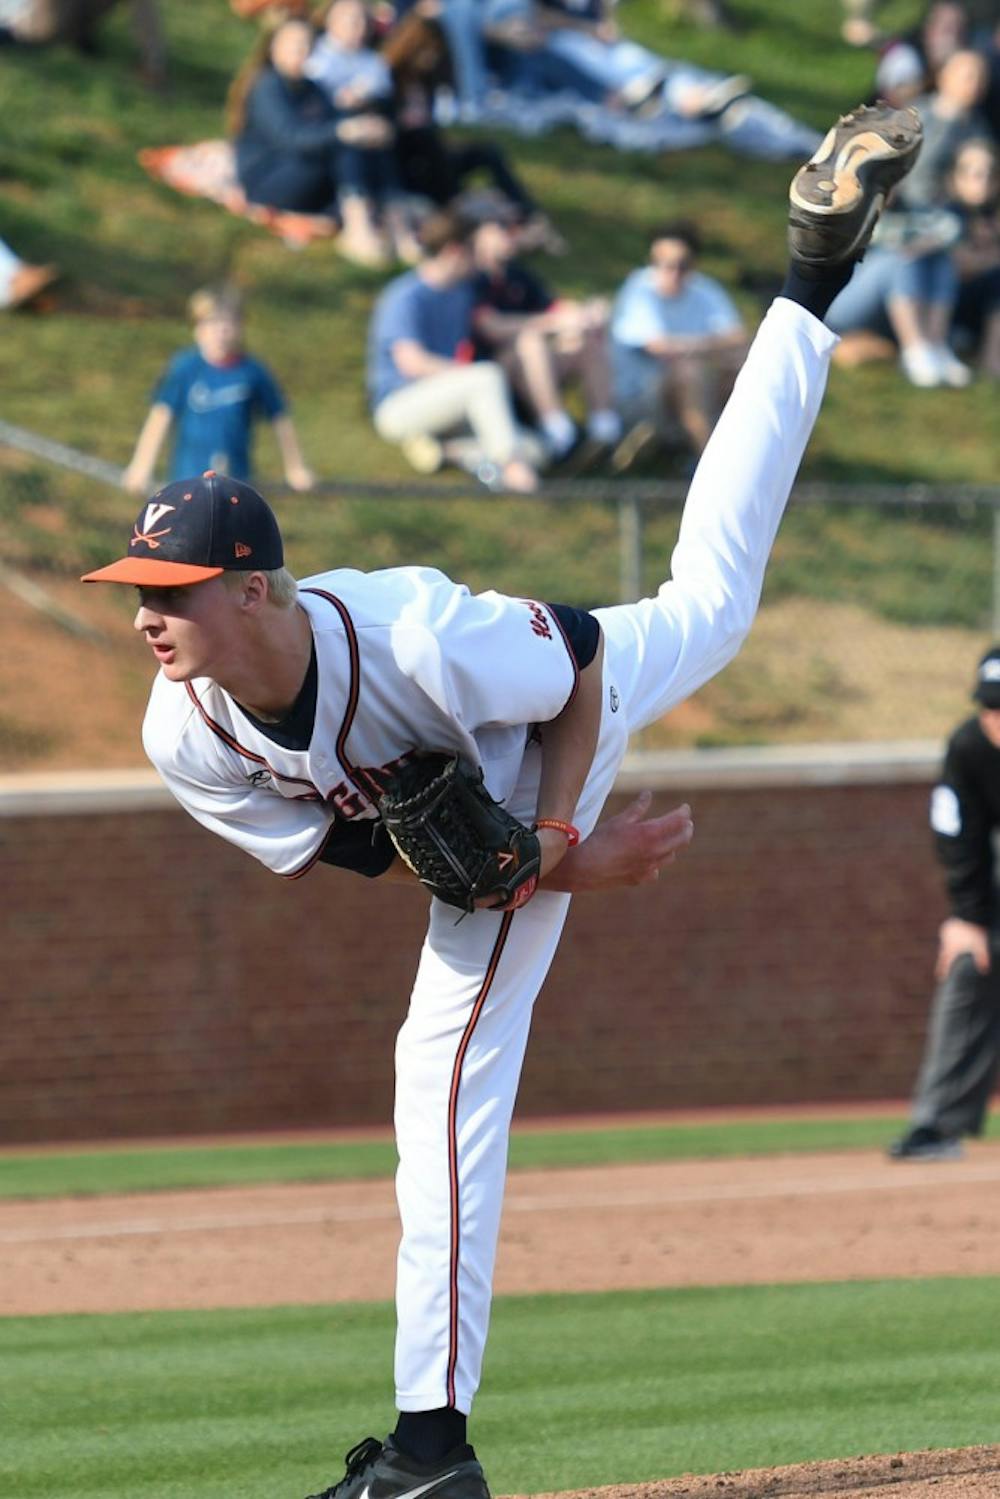 <p>Freshman pitcher&nbsp;Noah Murdock, who was drafted in Round 38 of the MLB Draft by the Washington Nationals, has a 3.80 ERA this season.</p>